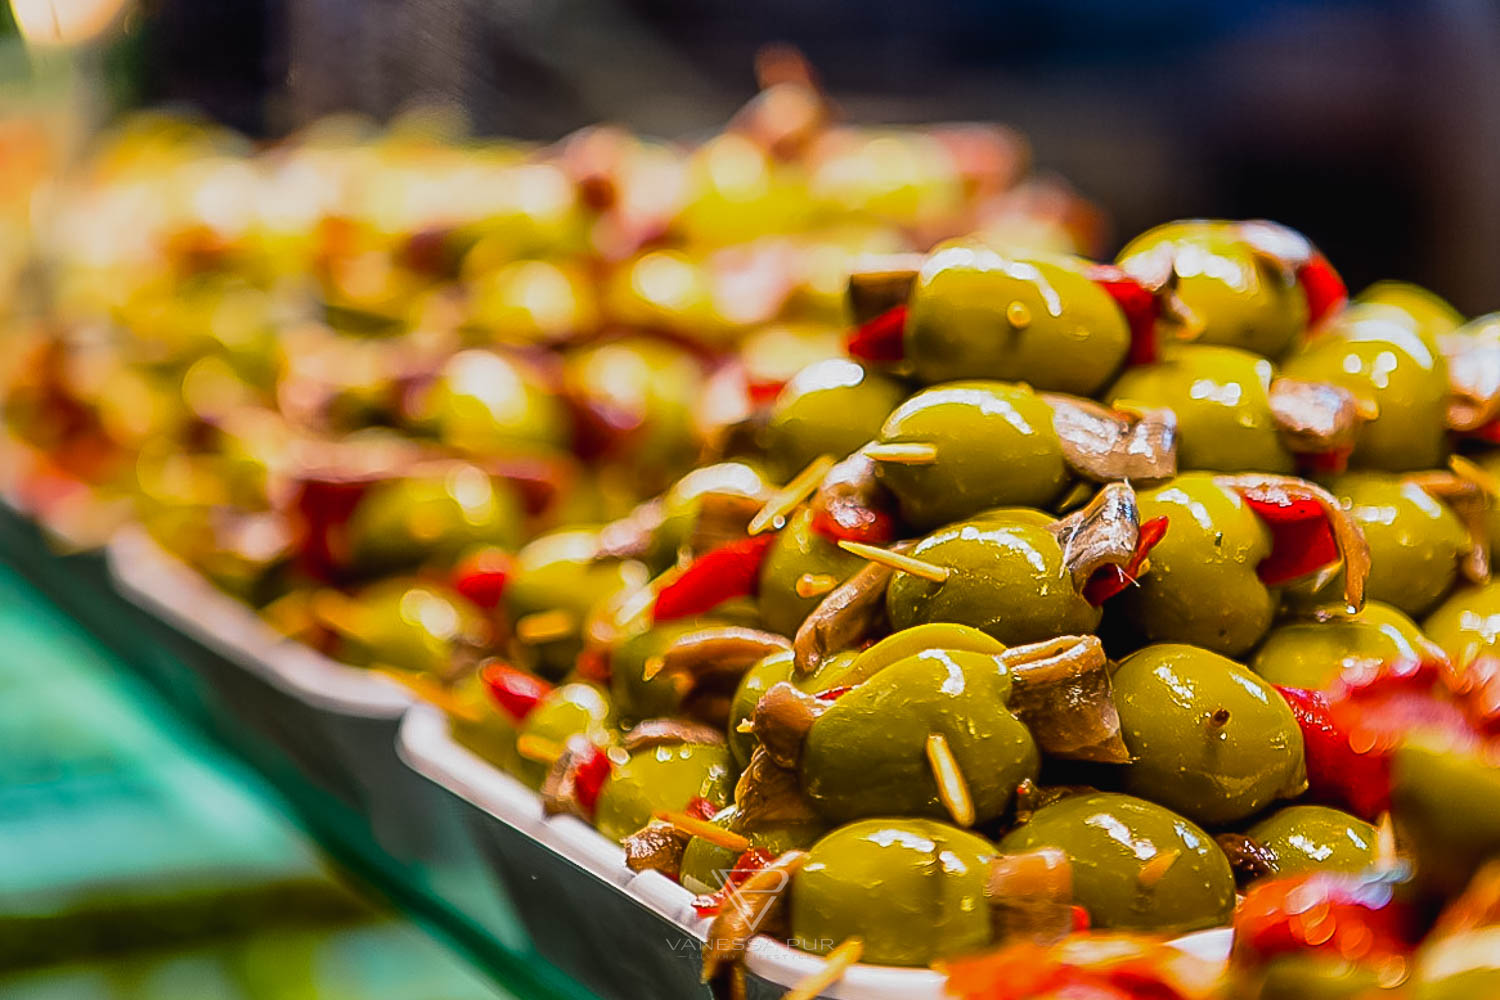 Madrid top 10 restaurants for tapas and sweets - Sightseeing - Mercado de San Miguel - Madrid, Spain - Tapas, Bars and Entertainment